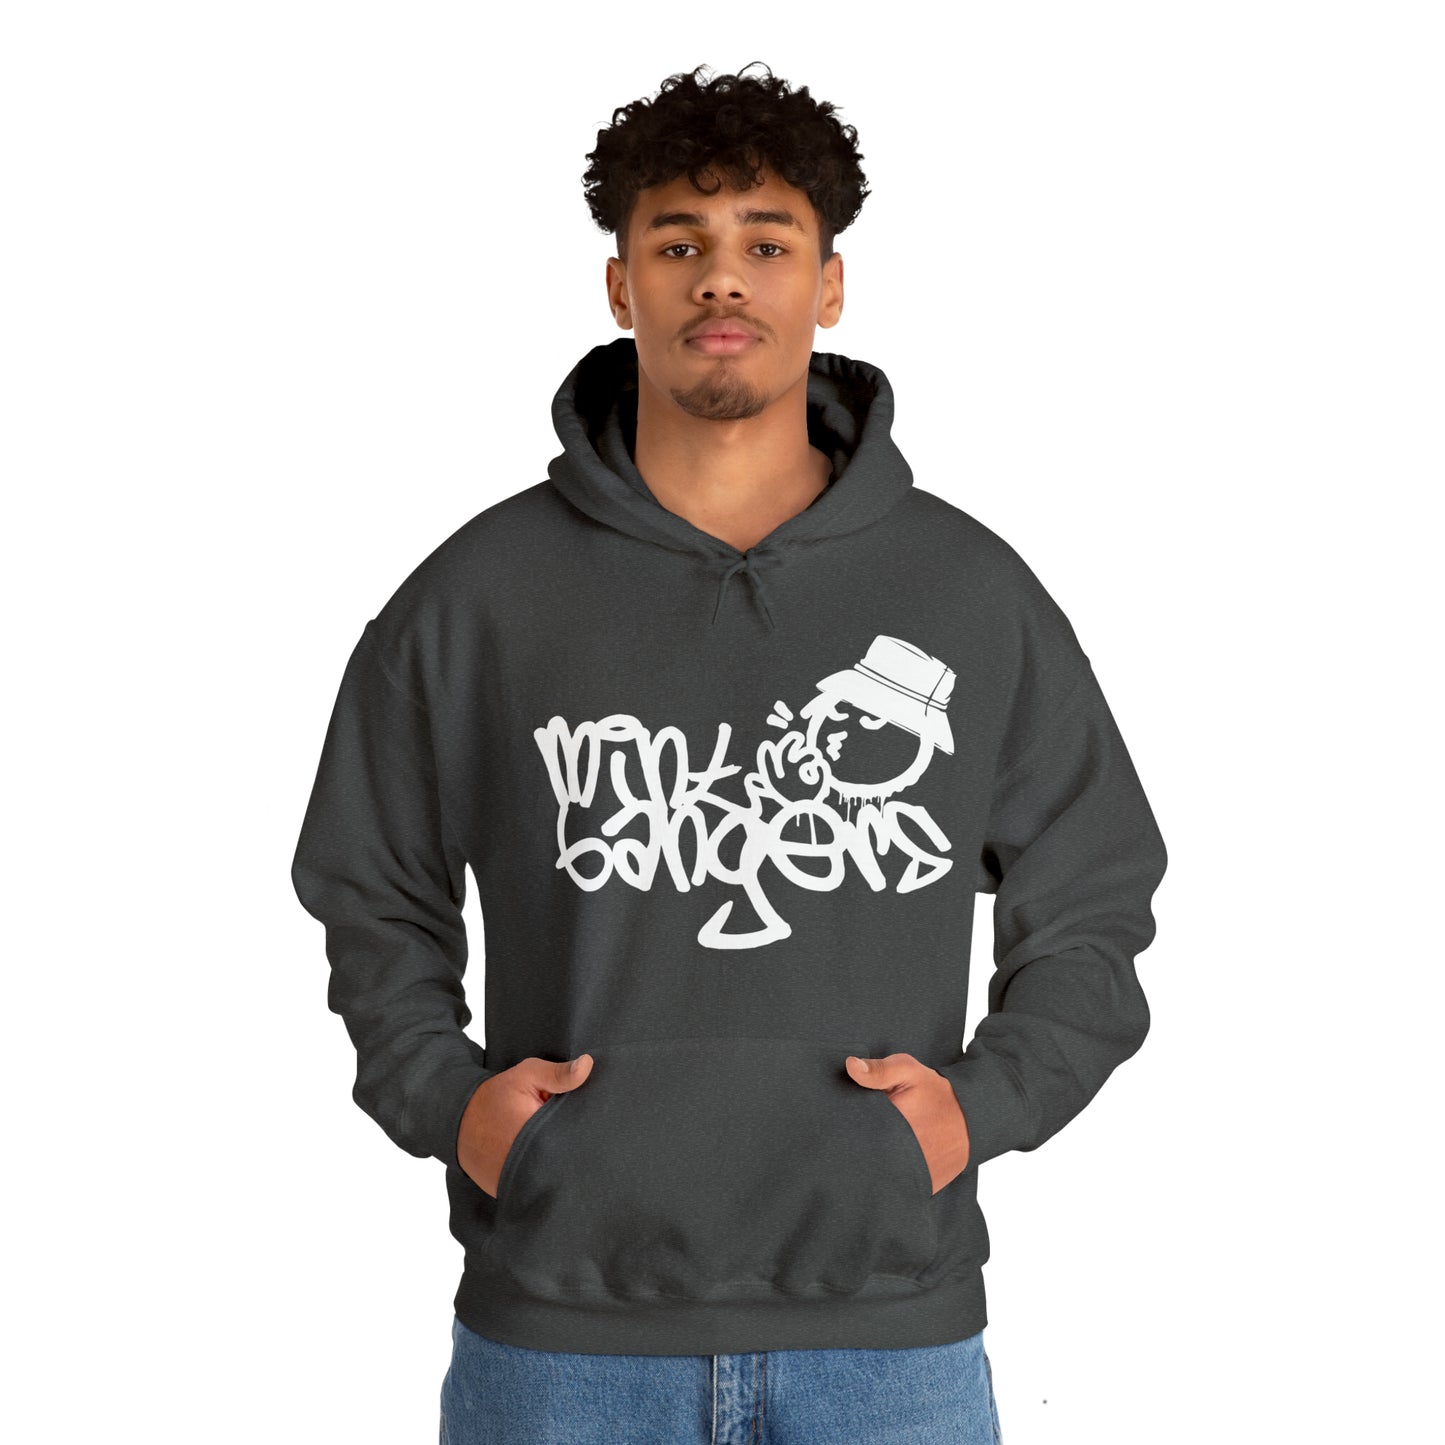 Mint Bangers - Unisex Pull Over Hoodie